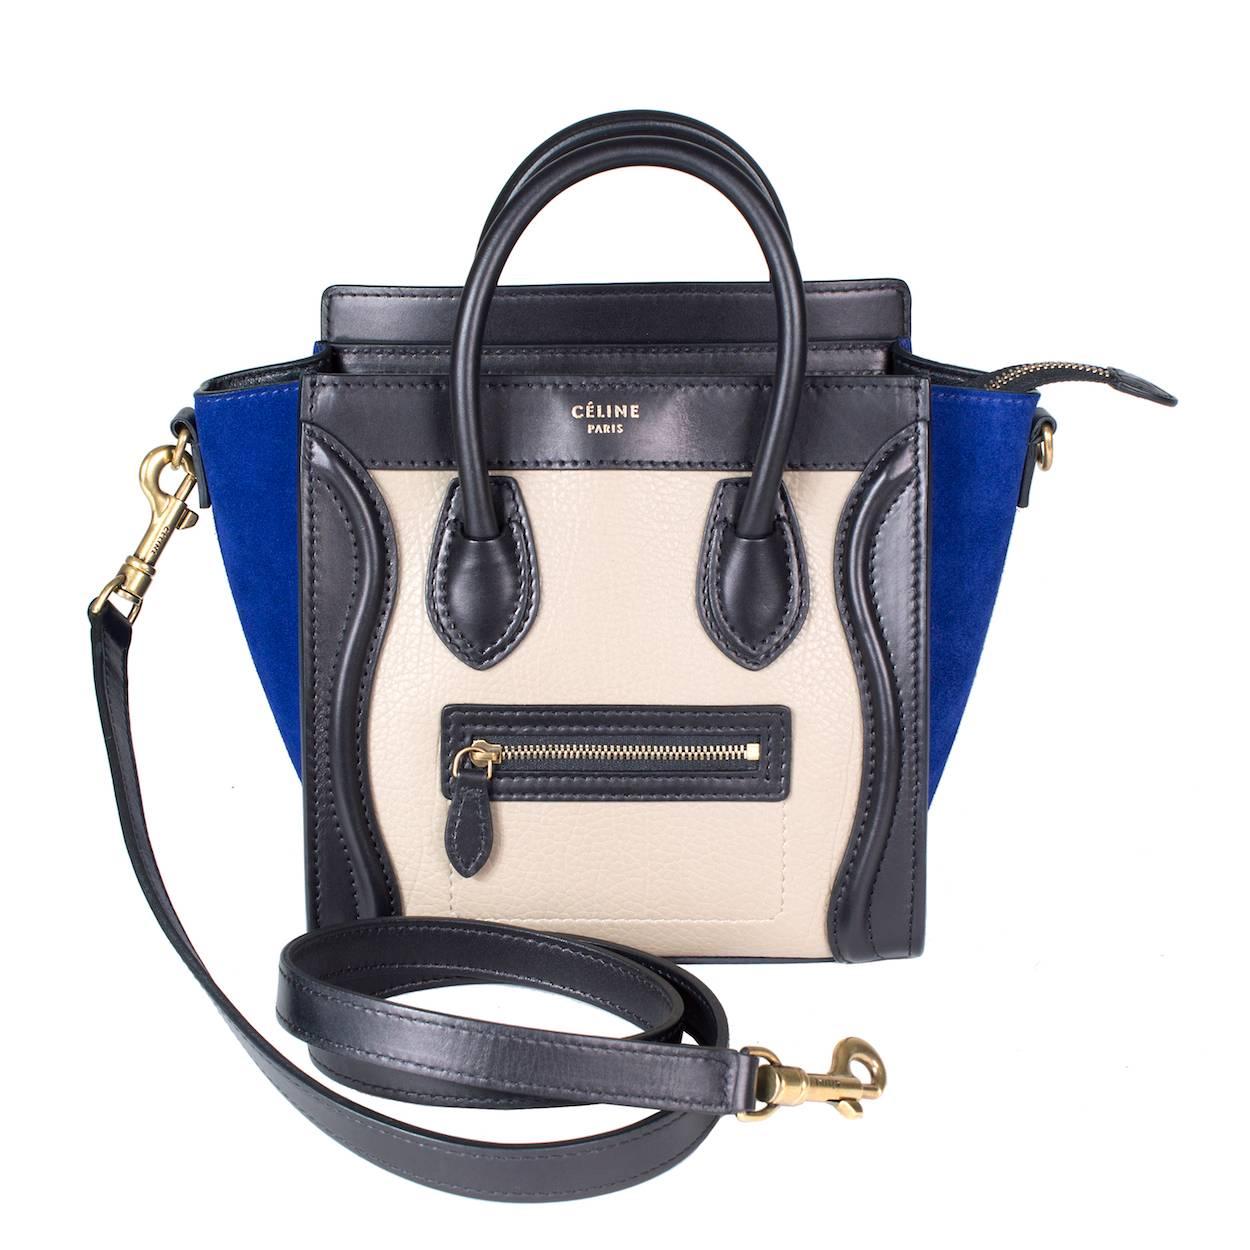 This is a modern mini tote from Celine.  It features black and taupe leather with royal blue suede.  It comes with a detachable 43